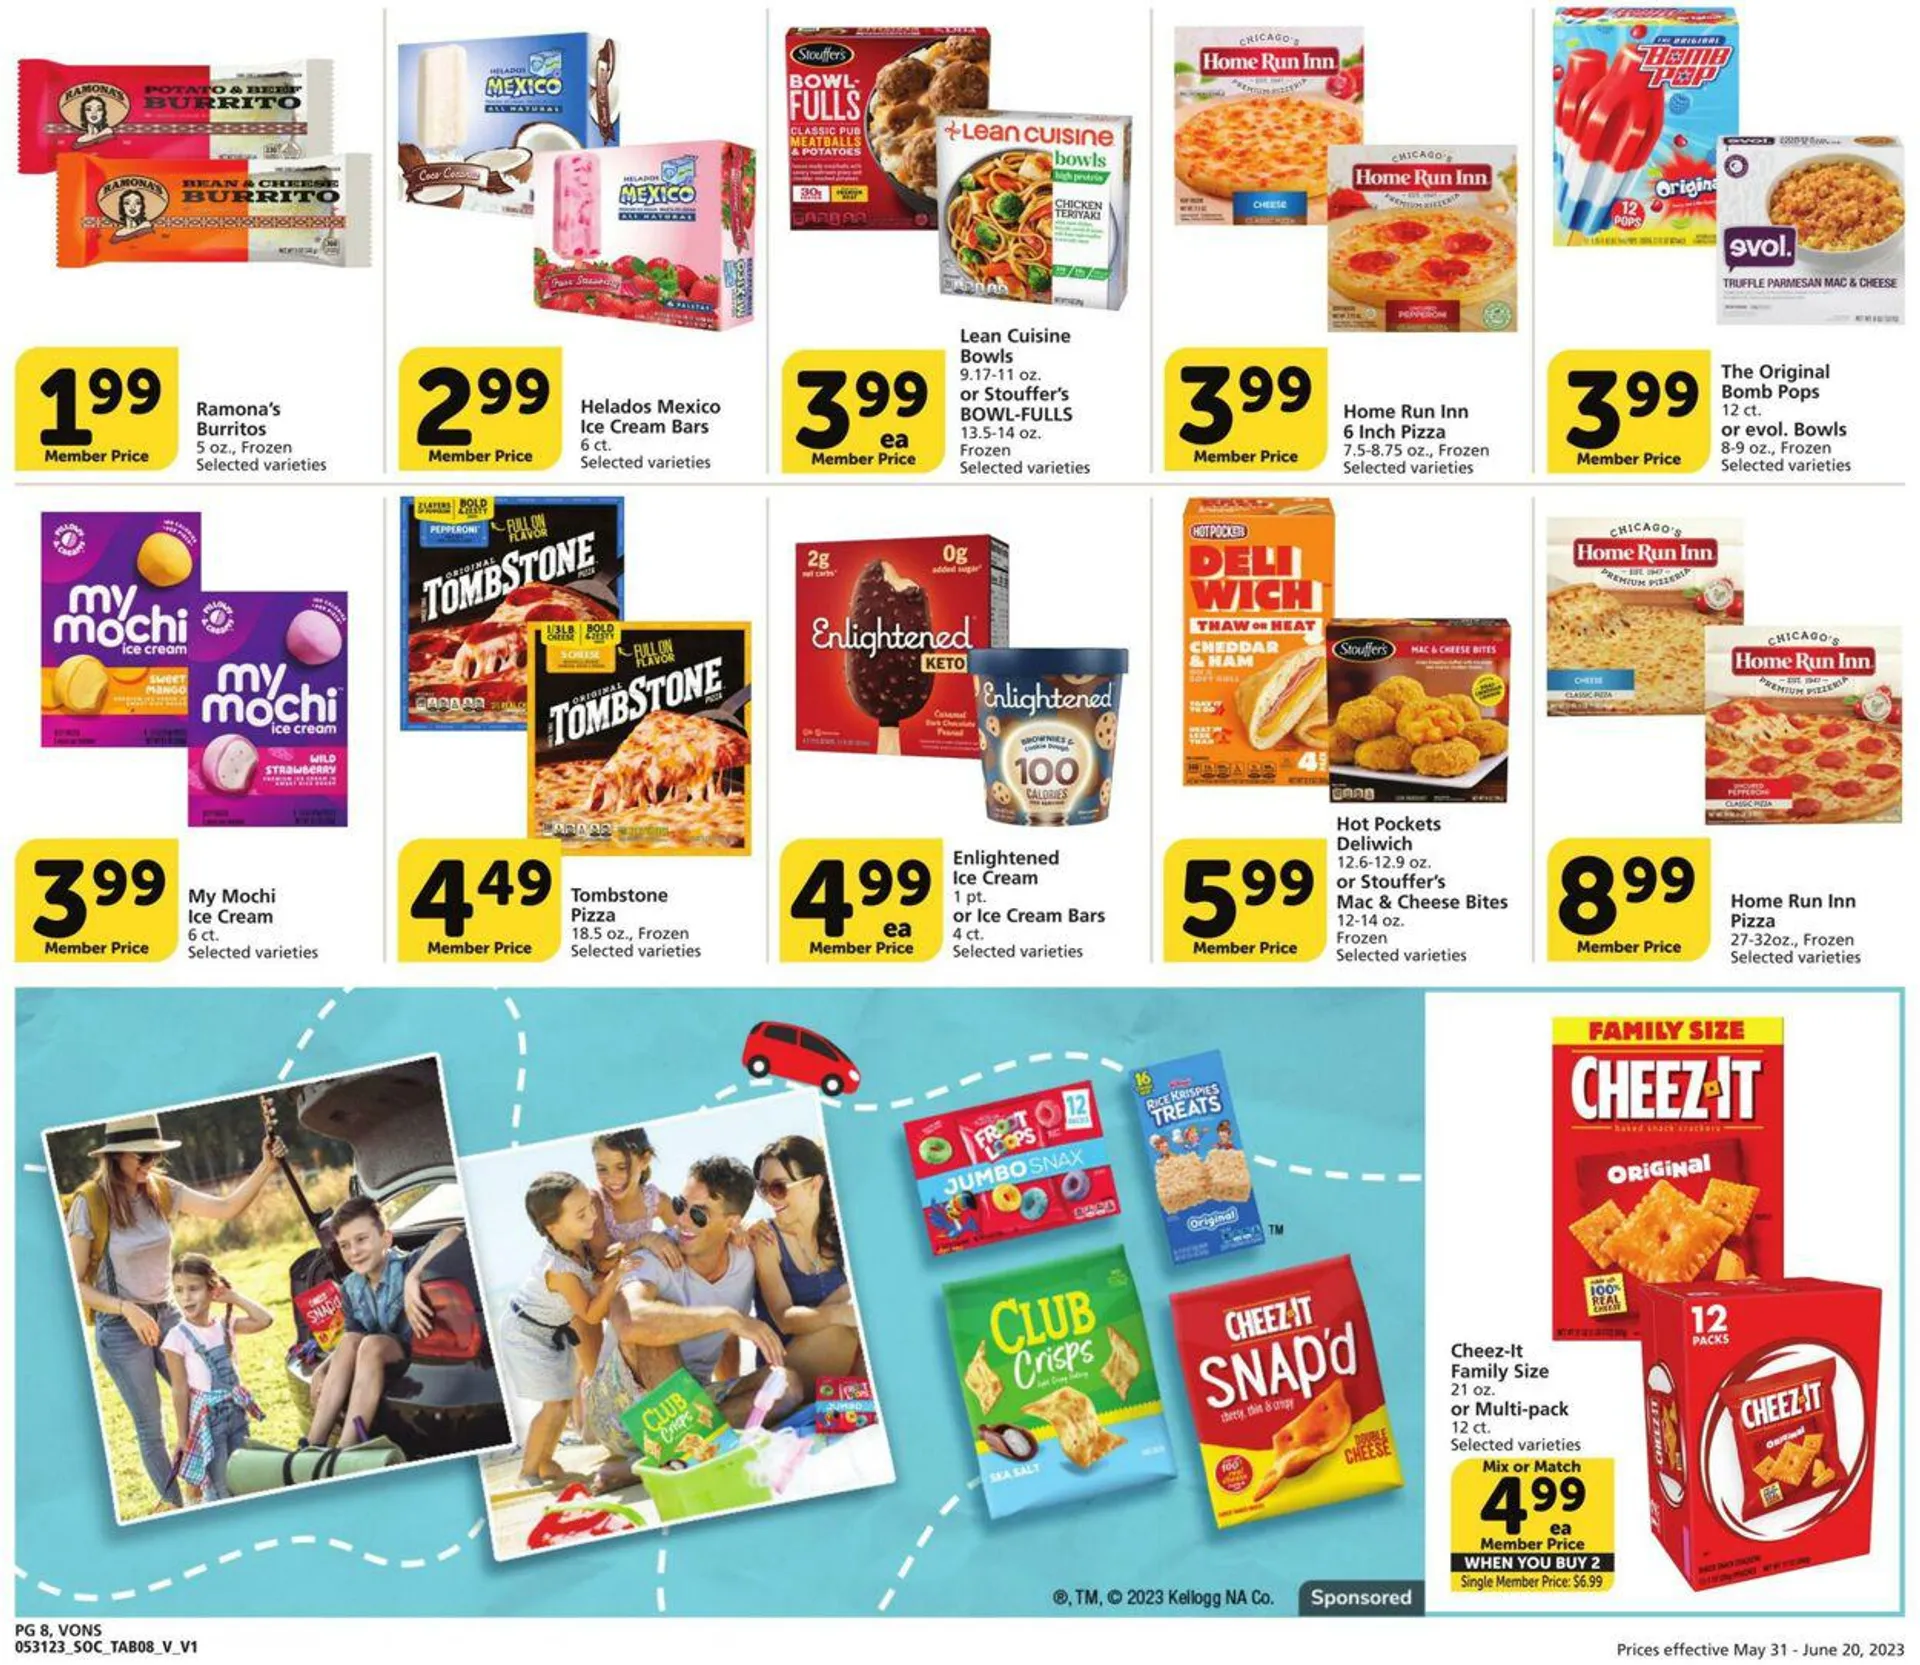 Vons Current weekly ad - 8